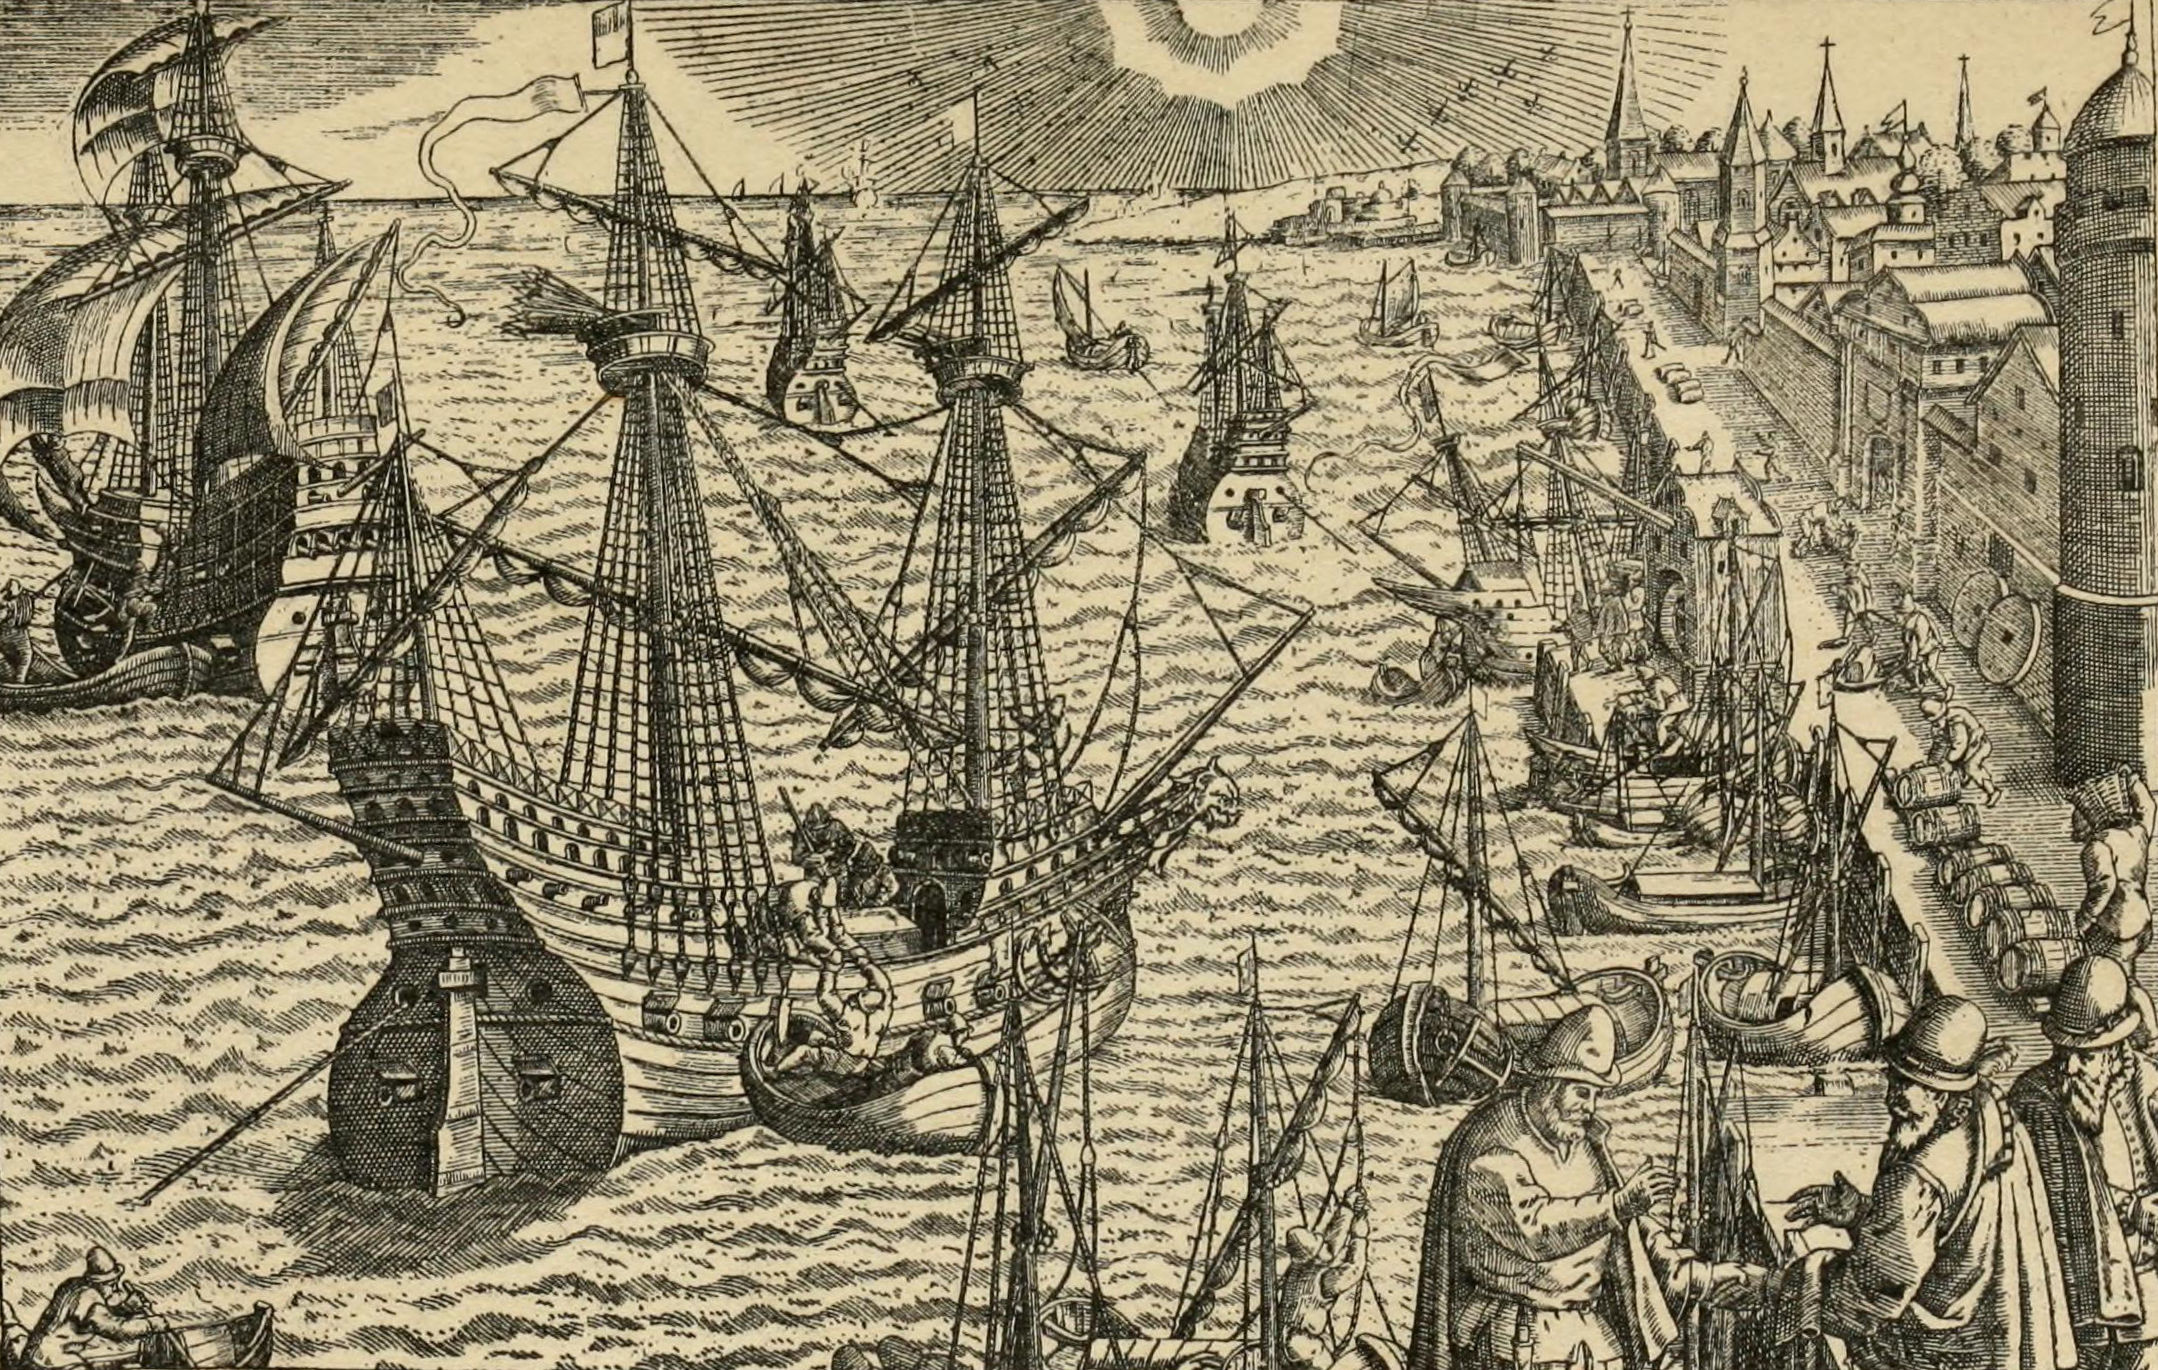 File:The life of Ferdinand Magellan and the first circumnavigation